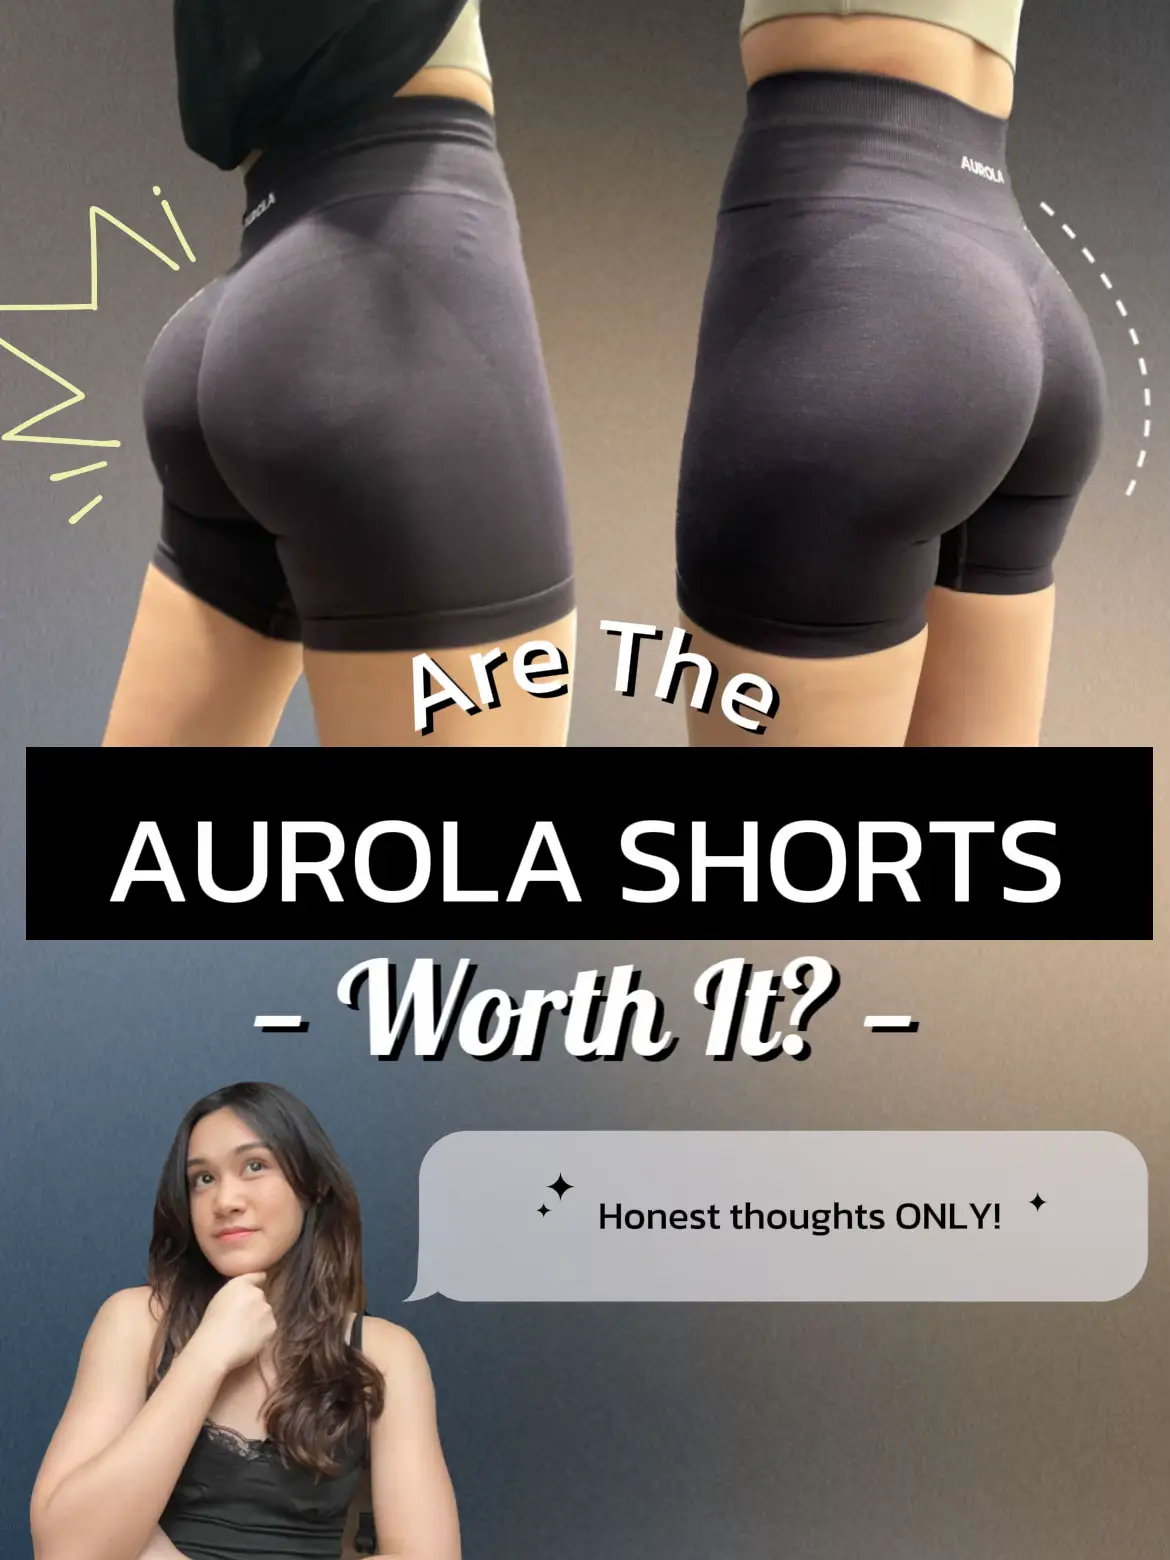 AIRism Body Shaper Non-Lined Half Shorts (Support), Women's Fashion, New  Undergarments & Loungewear on Carousell